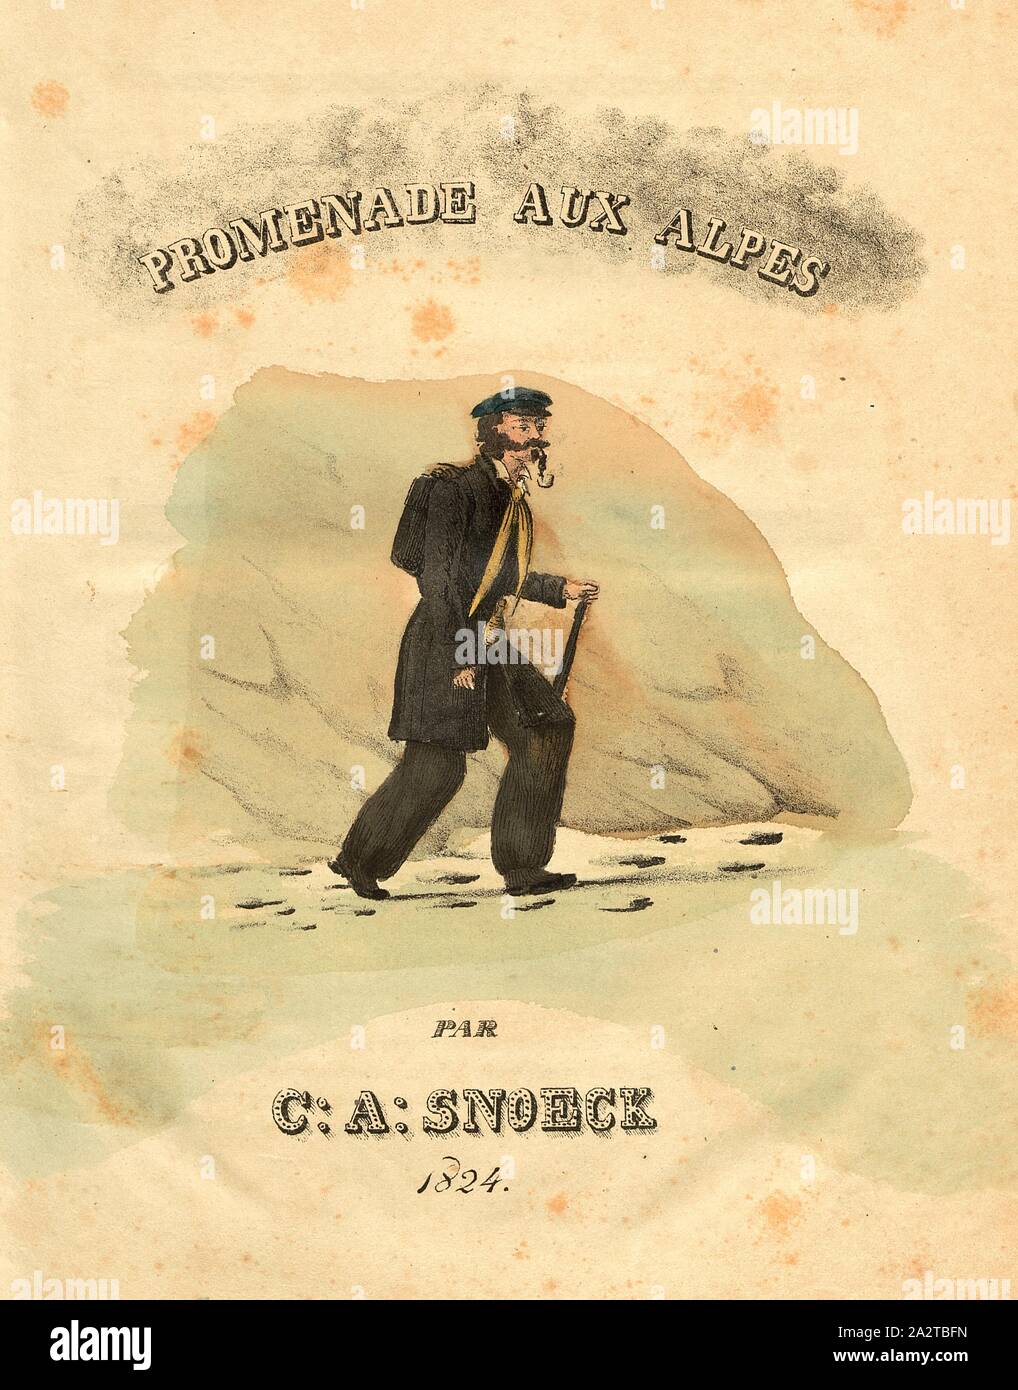 Walk to the Alps, traveler with pipe and backpack, title page, Snoeck, Charles Alexander (dess.), 1824, Charles Alexander Snoeck: Promenade aux Alpes. [Nicht ermittelbar]: [nicht ermittelbar], 1824 Stock Photo